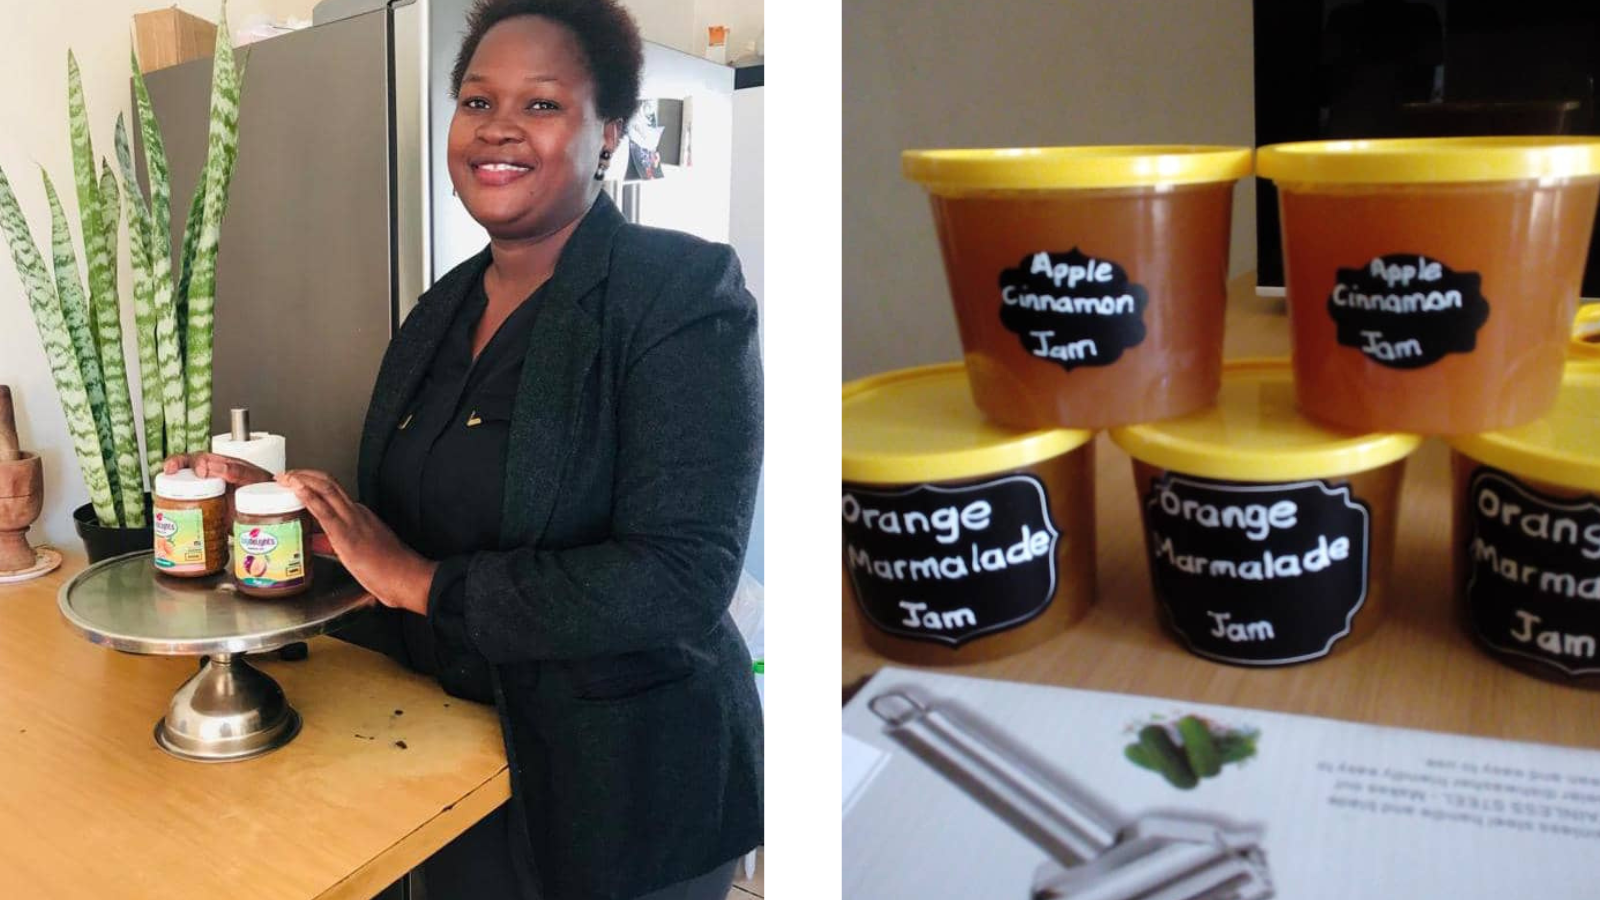 Angela Olifants is one of the participants who completed the AWOME program in Namibia. She runs a company that manufactures jam and marmalade. Photos courtesy of Angela Olifant